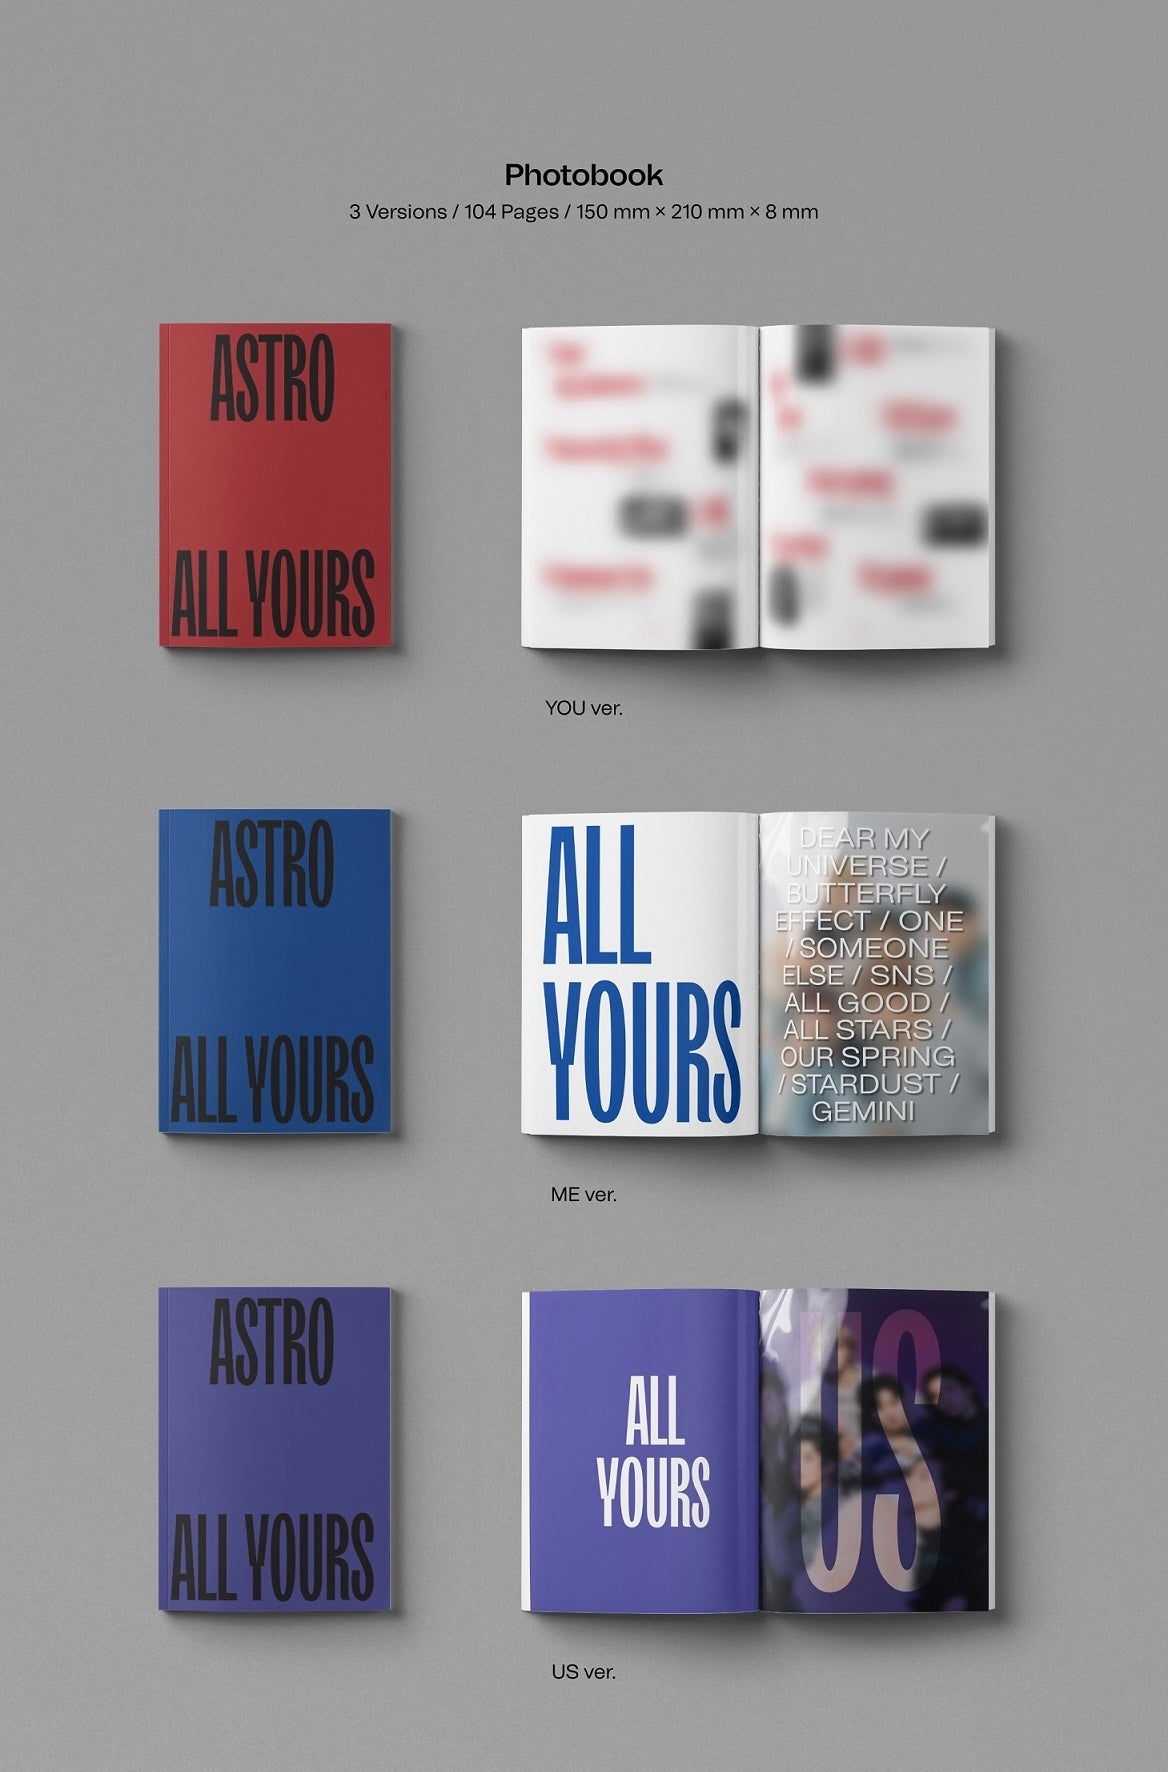 Astro • All Yours – Kpop Moon